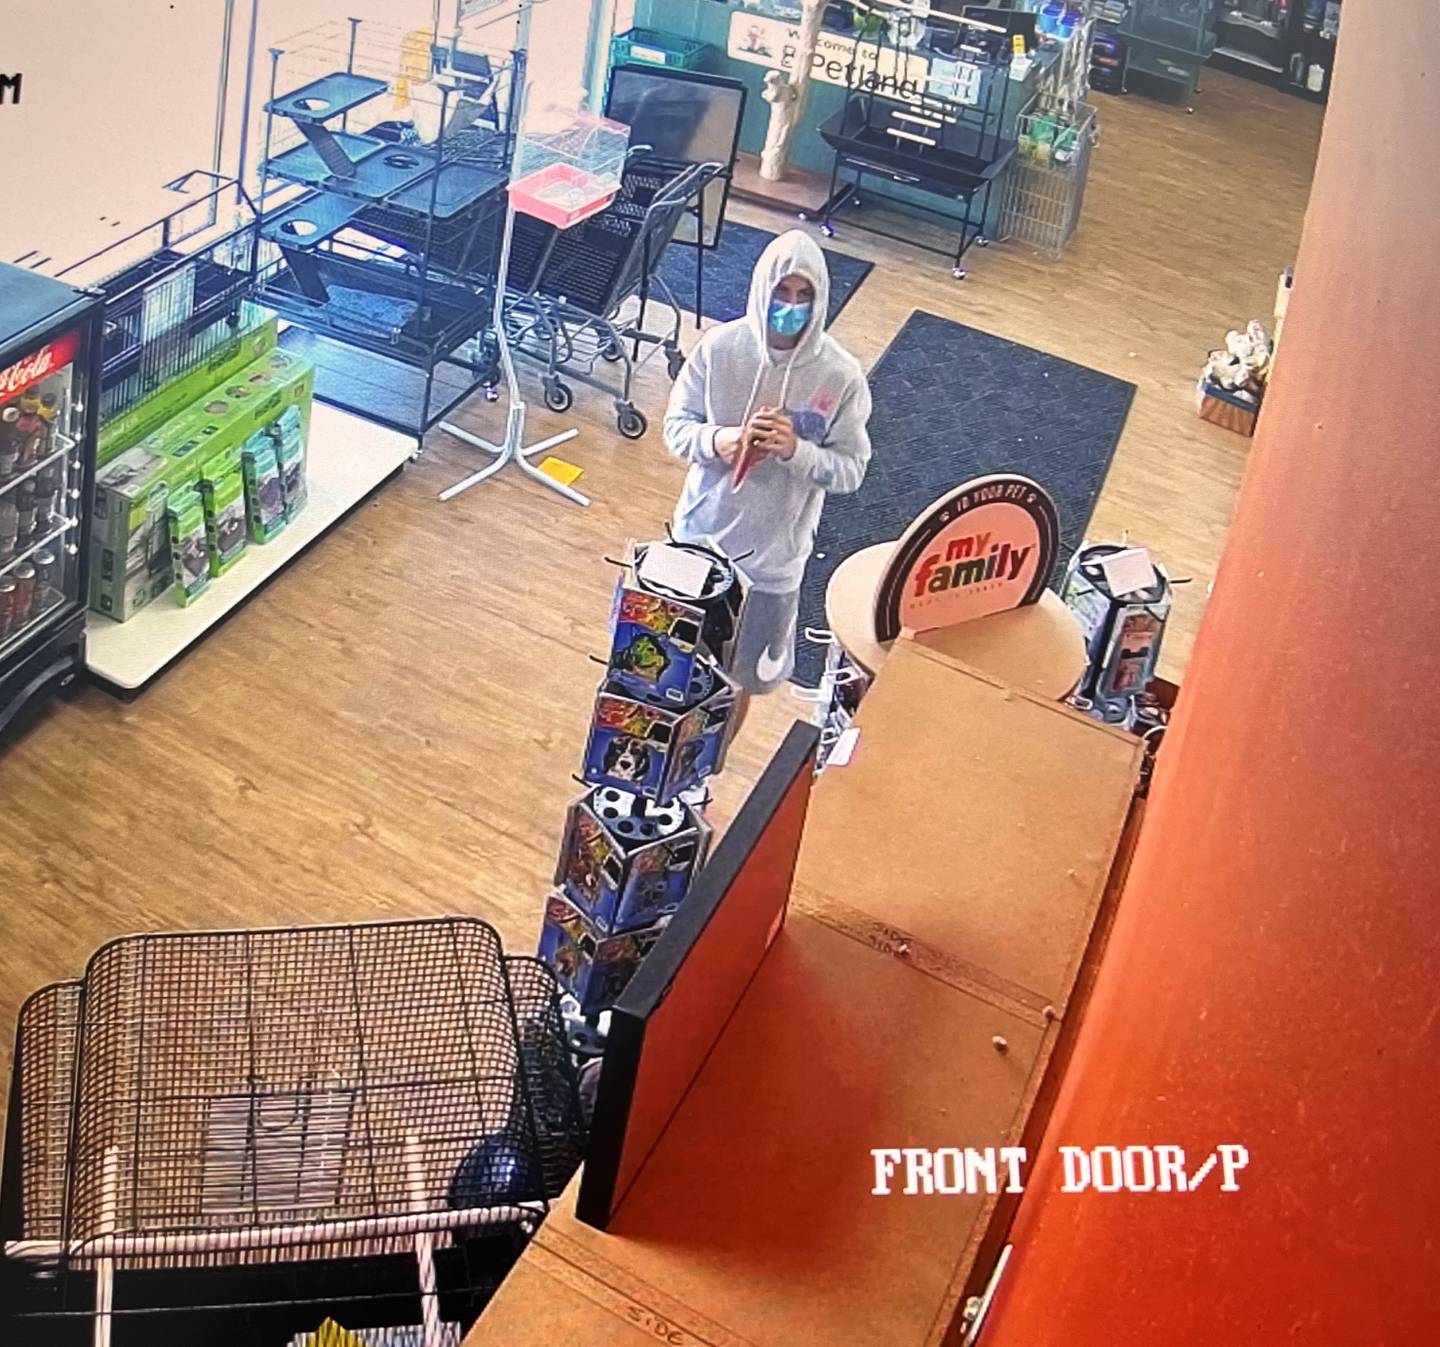 Surveillance video from Petland 401 N. Randall Road, Batavia, about 5 p.m. June 16, minutes before the man holding the pineapple conure parrot ran out the door with it. The bird is still a baby, having been born March 25.